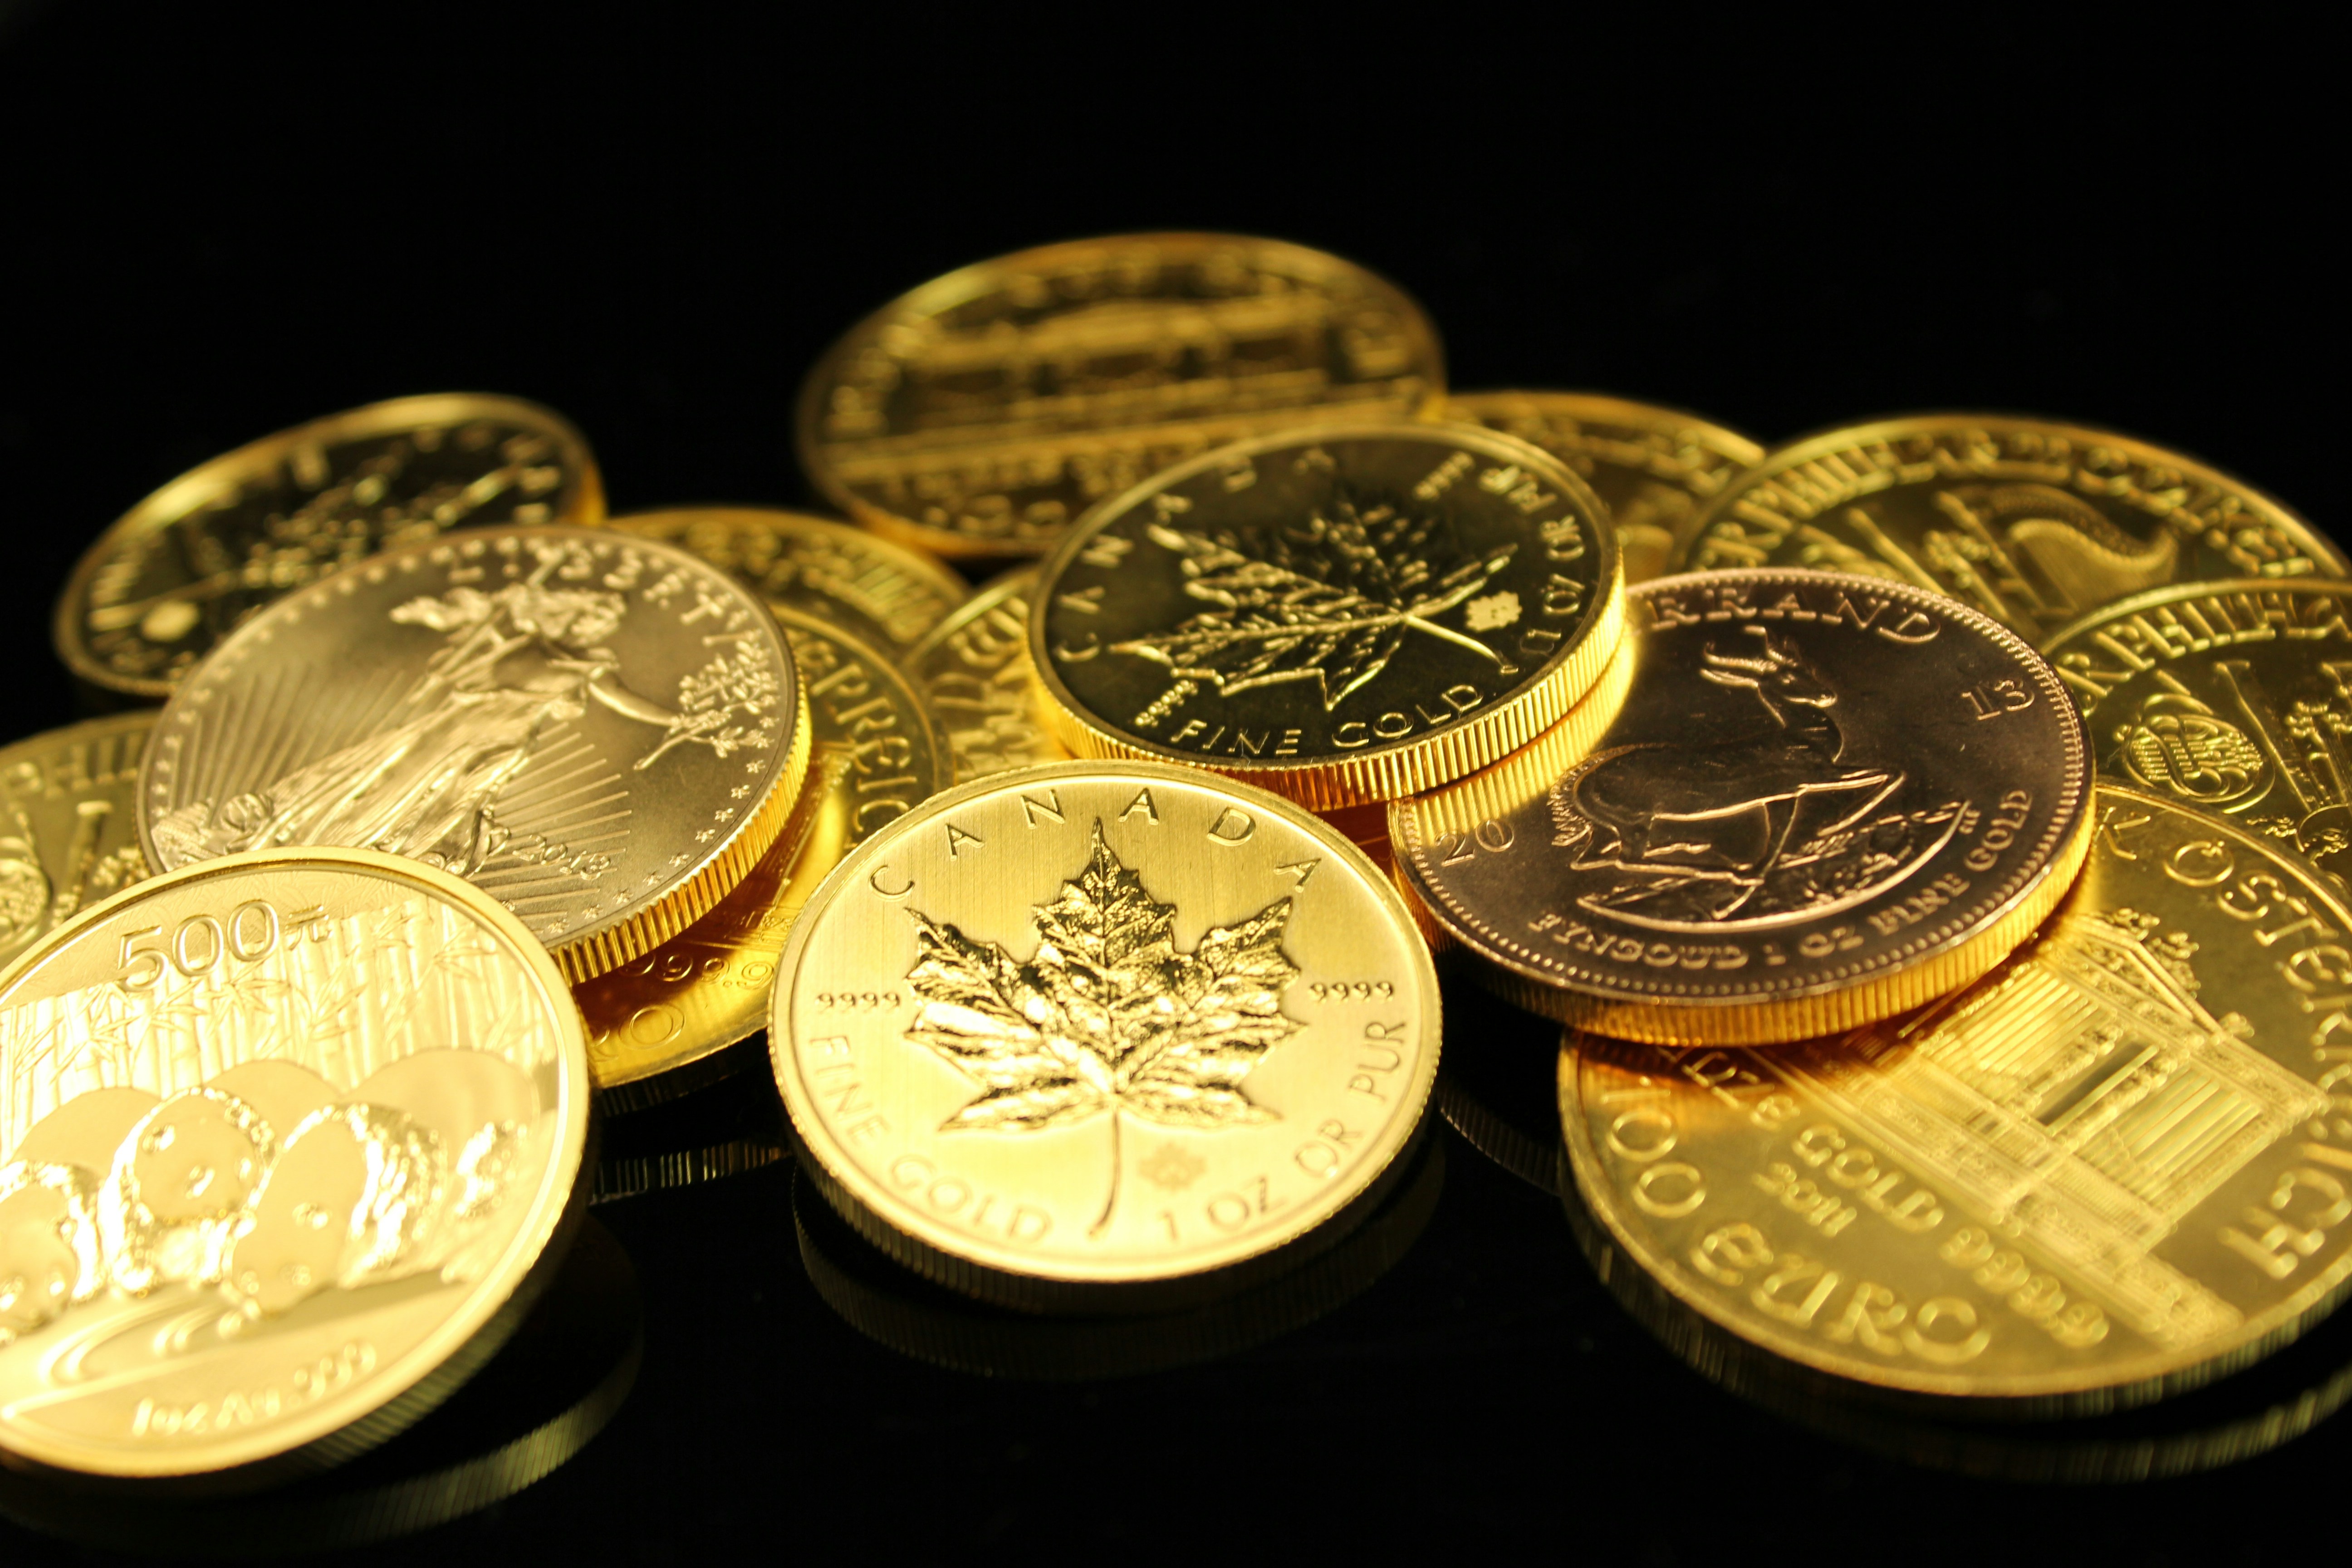 Pile of gold bullion coins. Münze Österreich, Royal Canadian Mint, U.S. Mint, Australian Mint of Perth, panda and Krugerrand. If you use our photos, please add credit to https://zlataky.cz, when possible